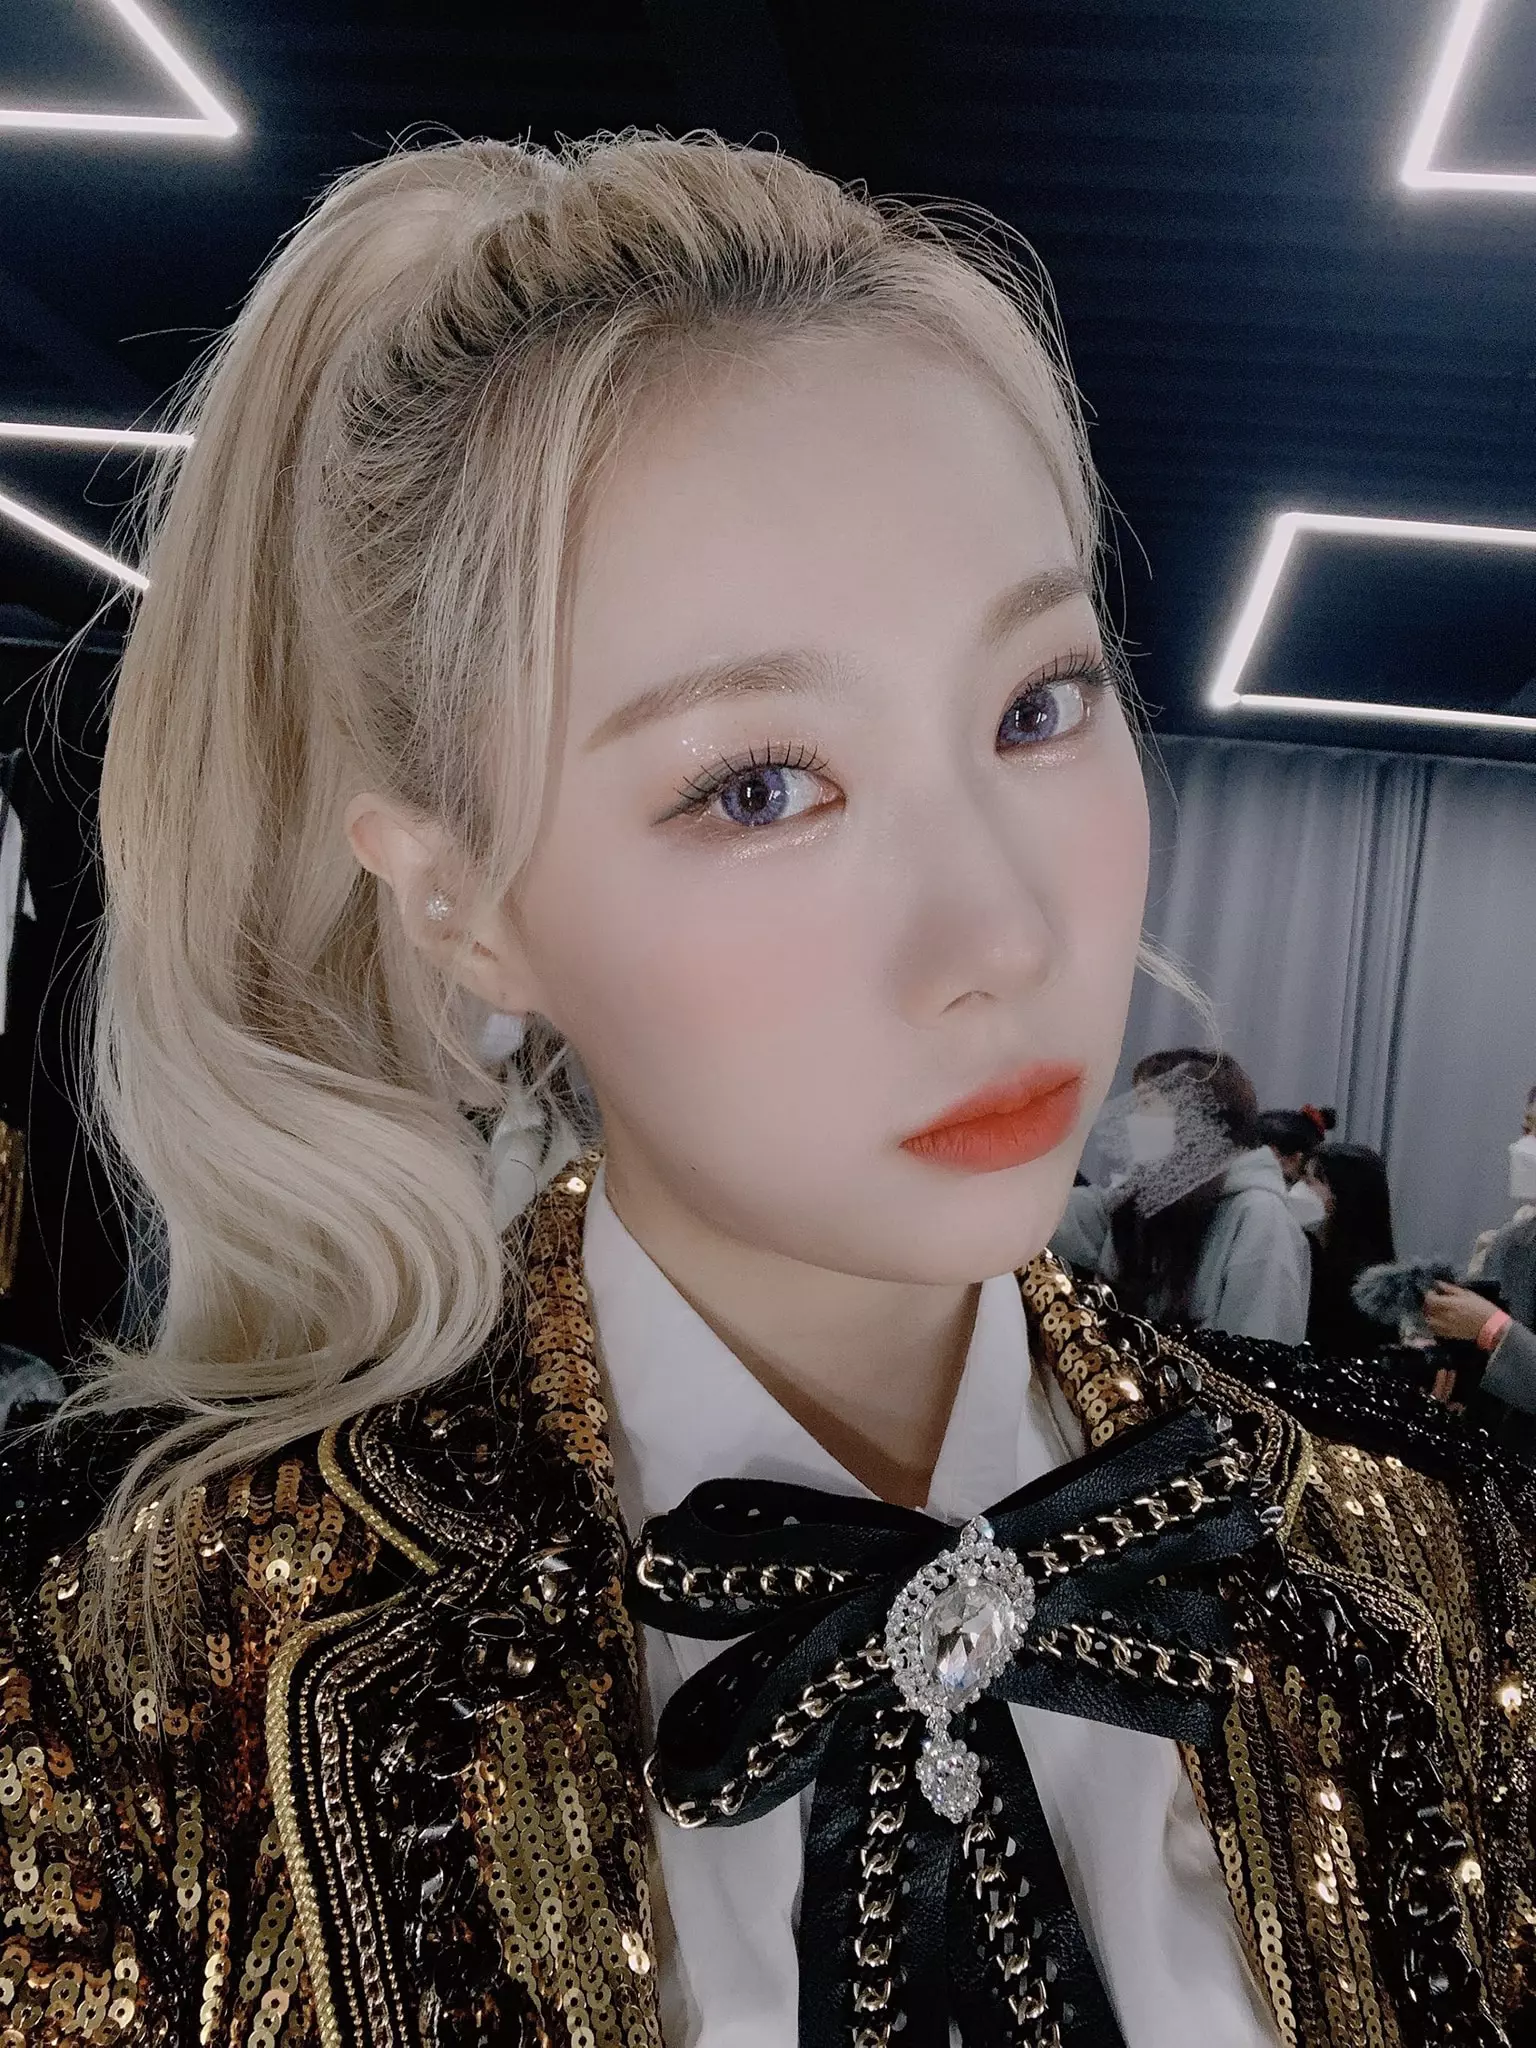 Image of Handong from Dreamcatcher